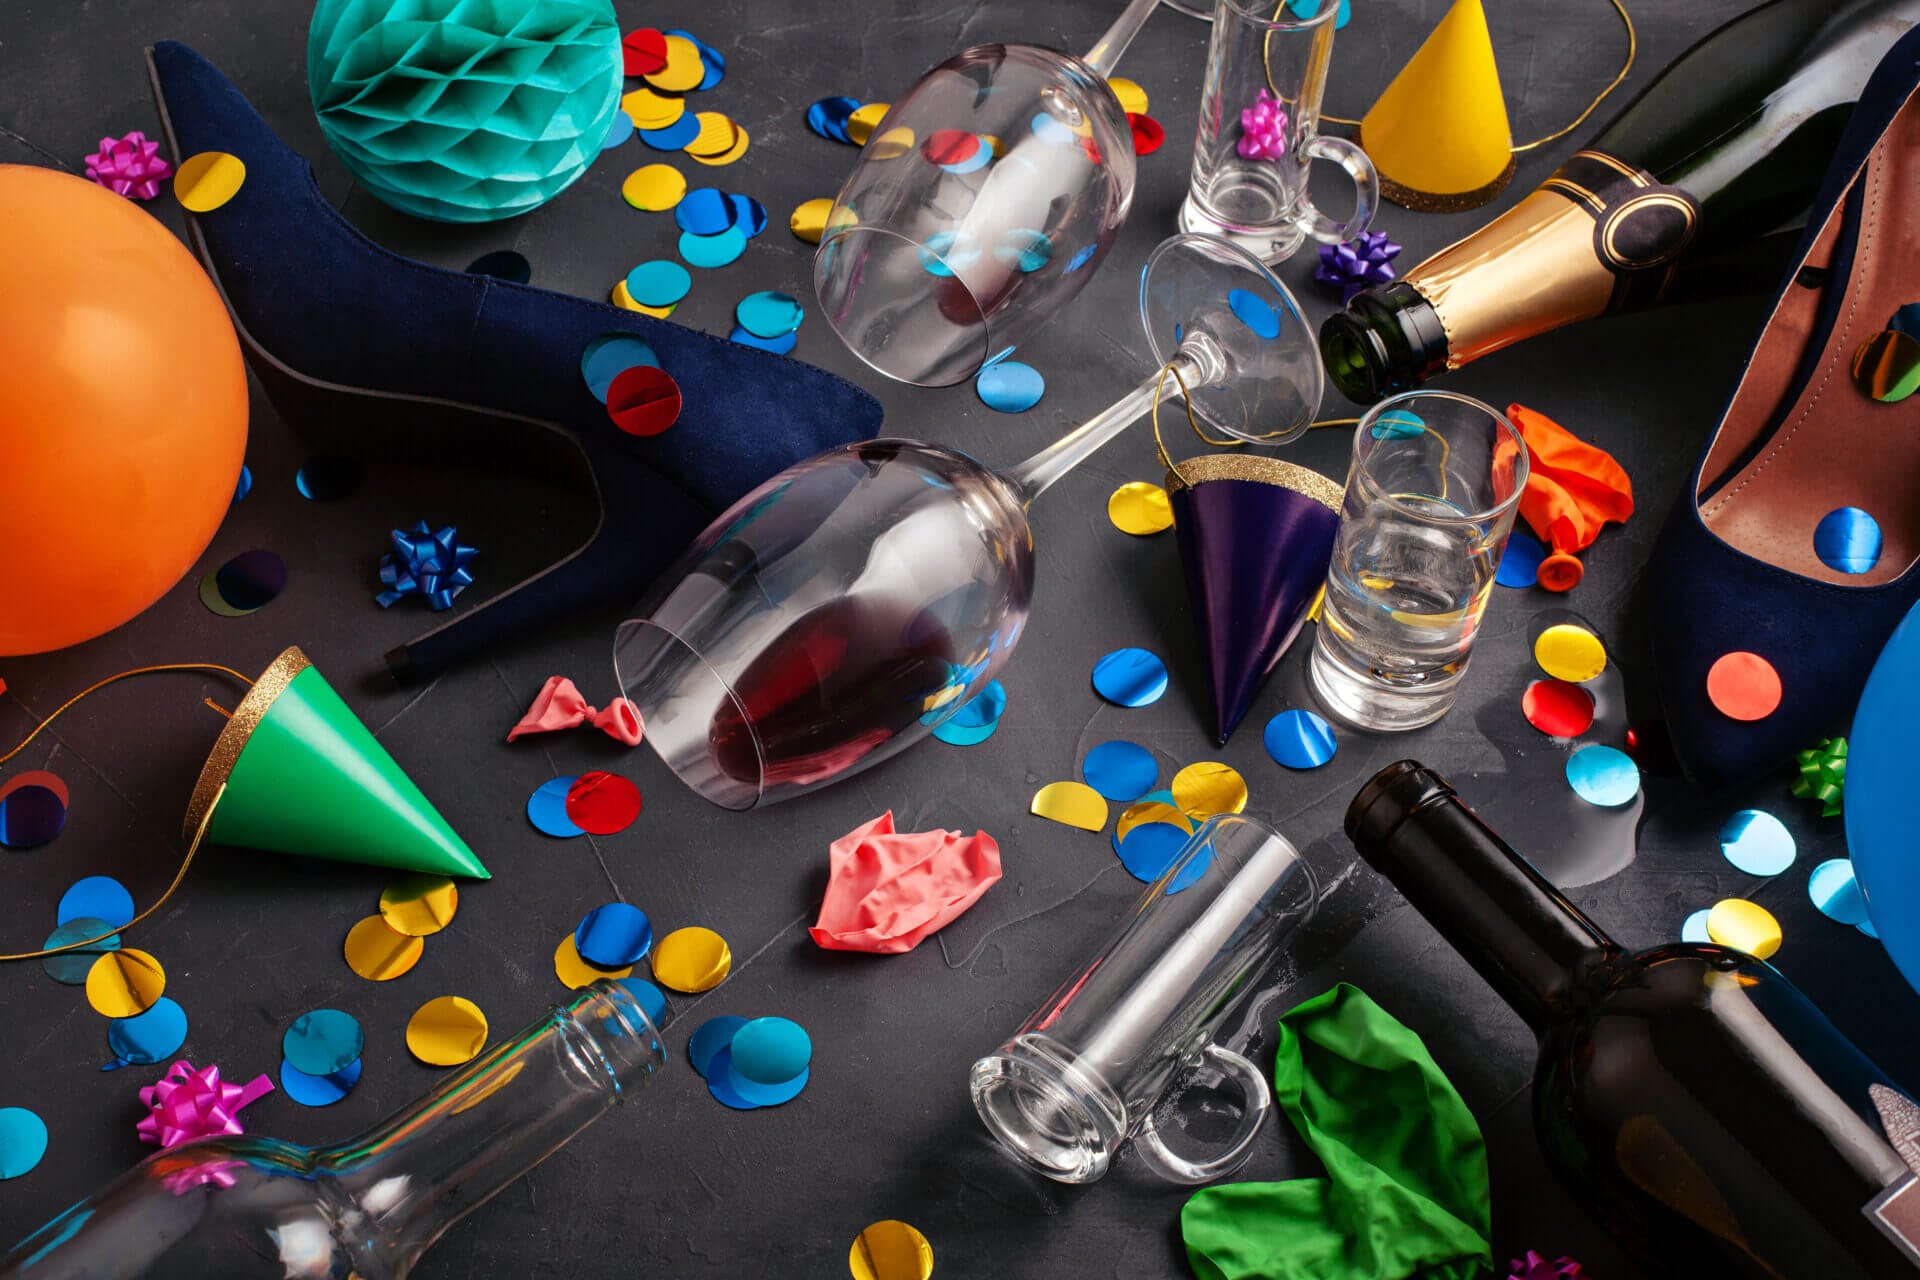 Hire a Post Party Cleaning Service to clean the mess after Christmas and new years